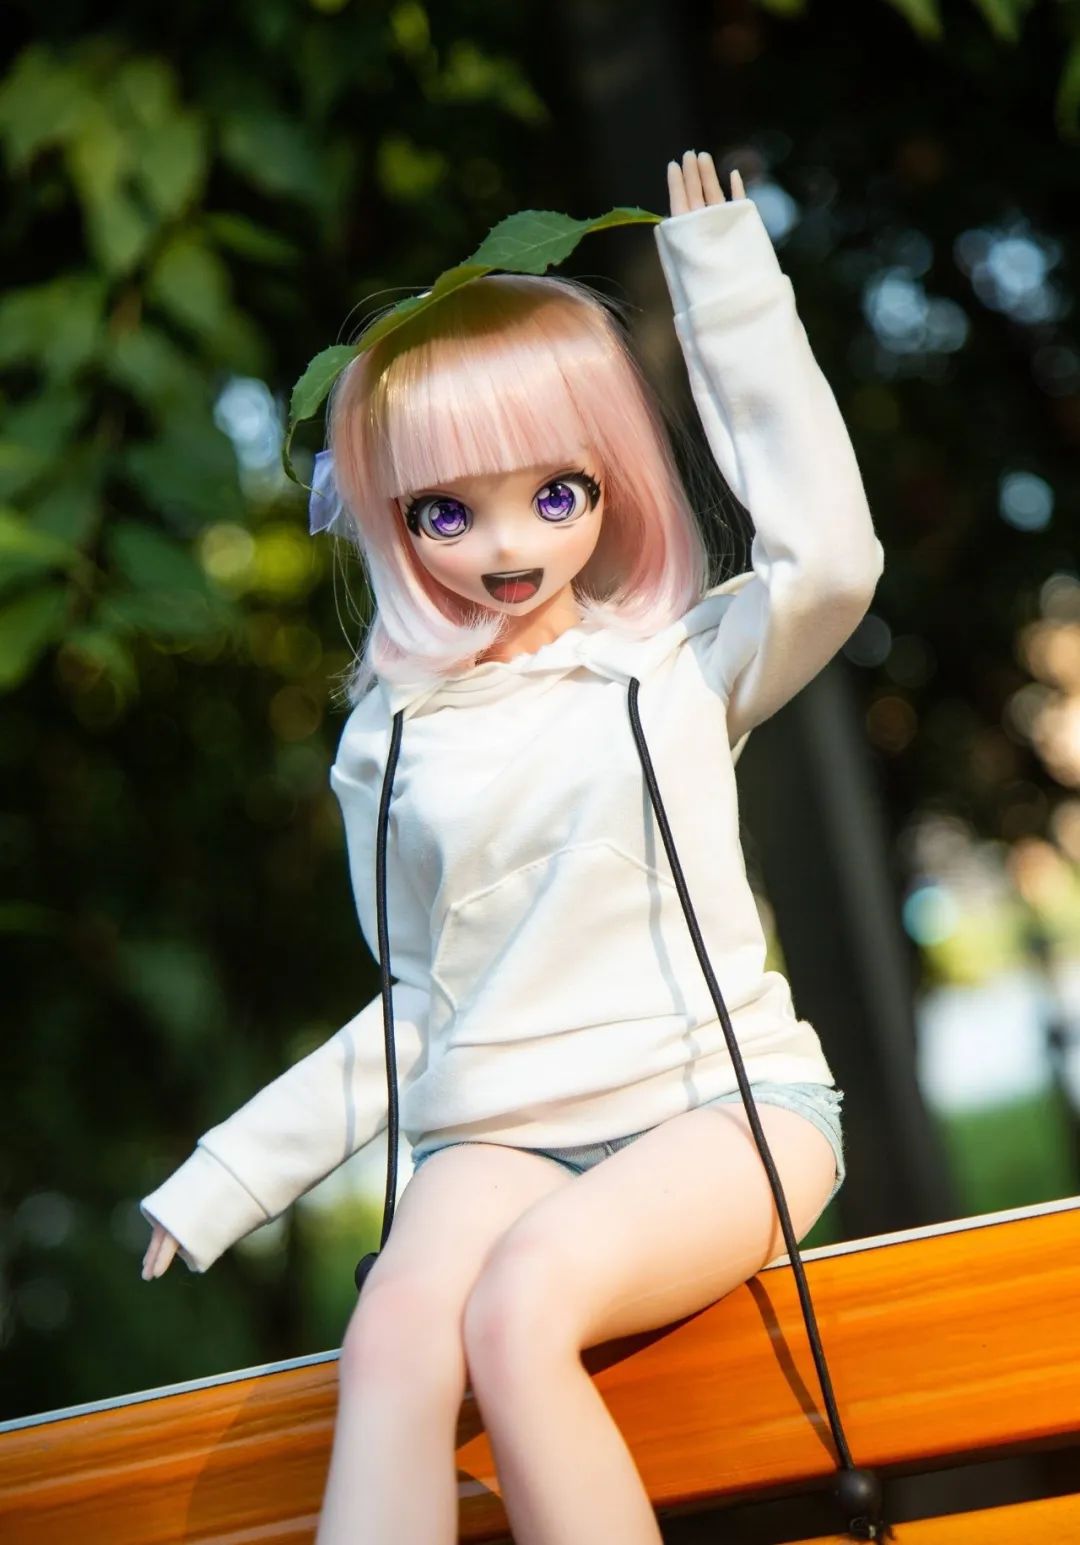 What is it like to take a physical doll out for a photo?